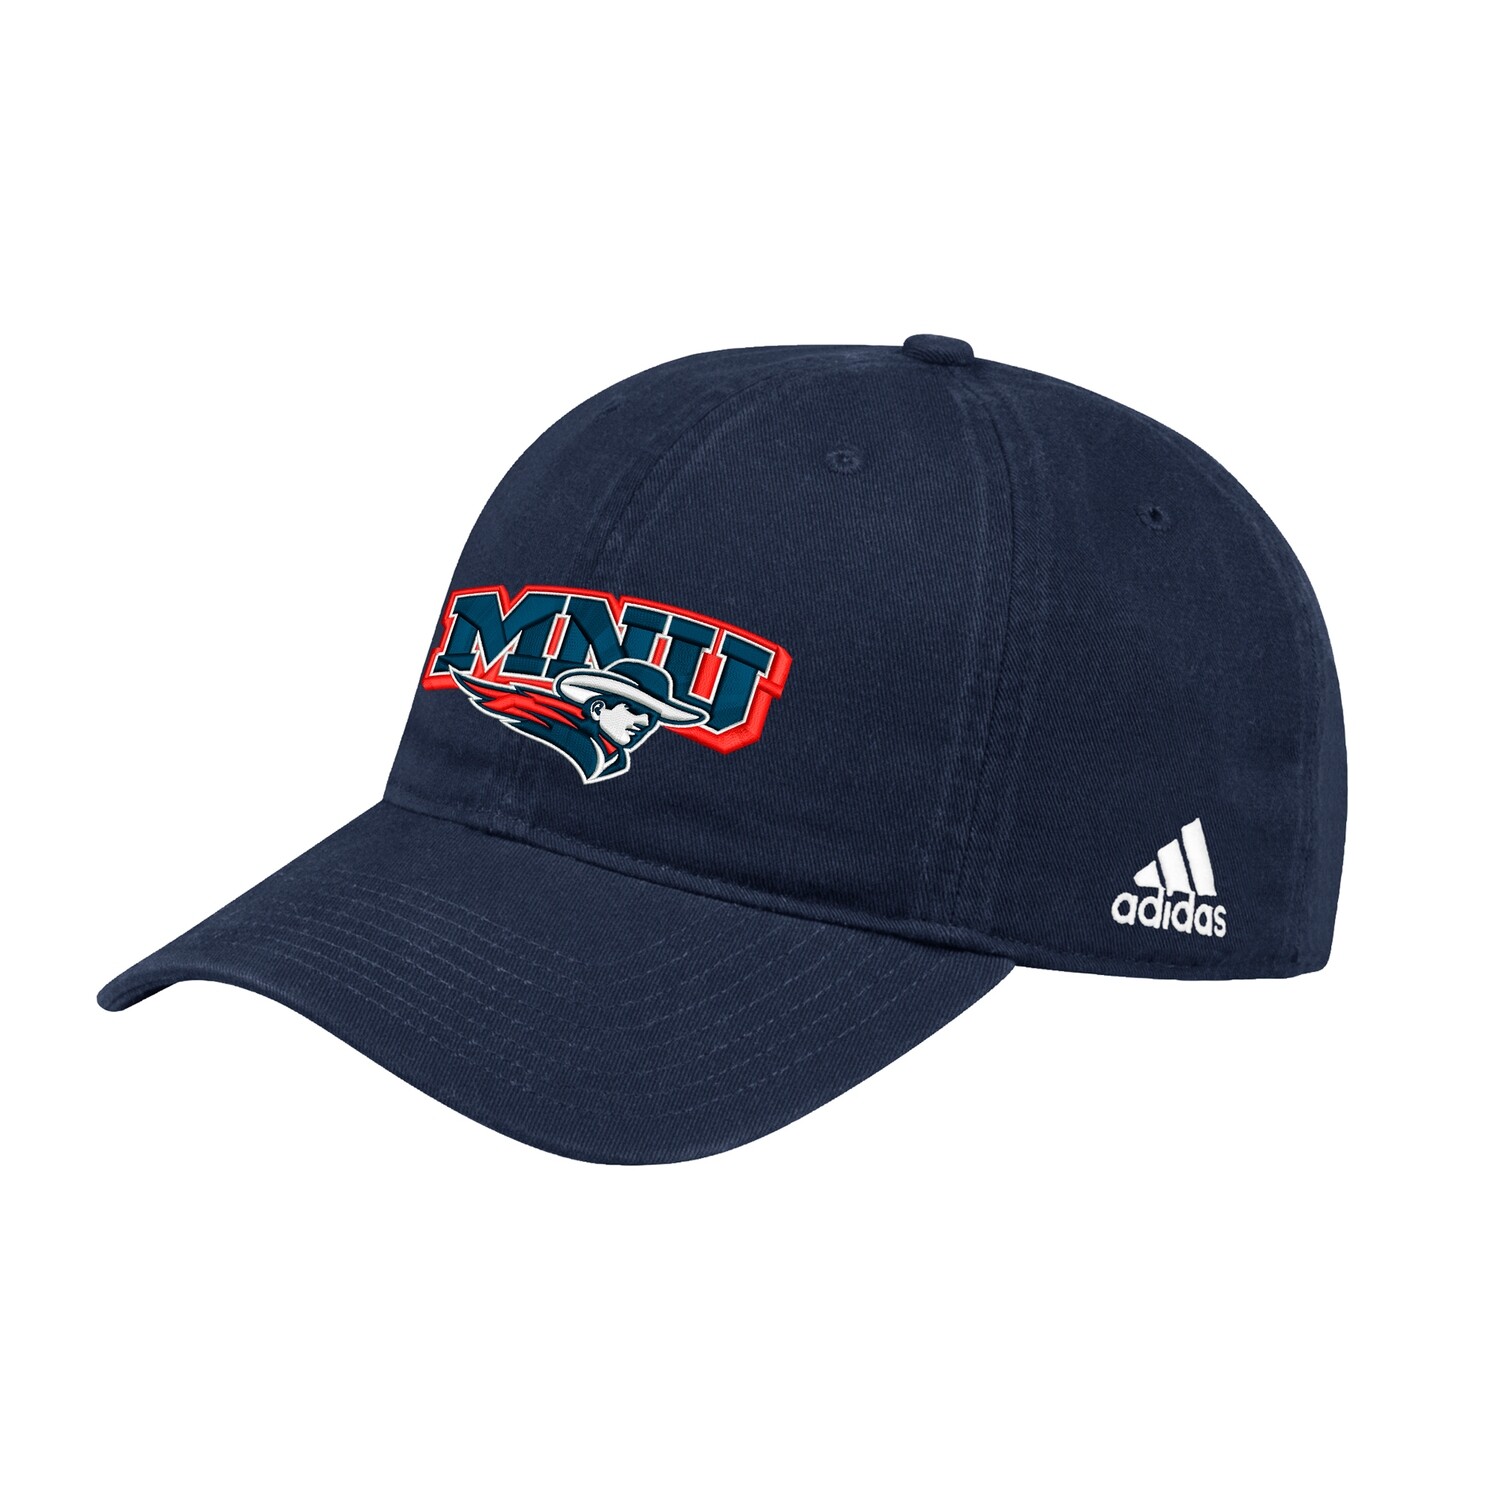 Adidas Adjustable Slouch Hat - Navy